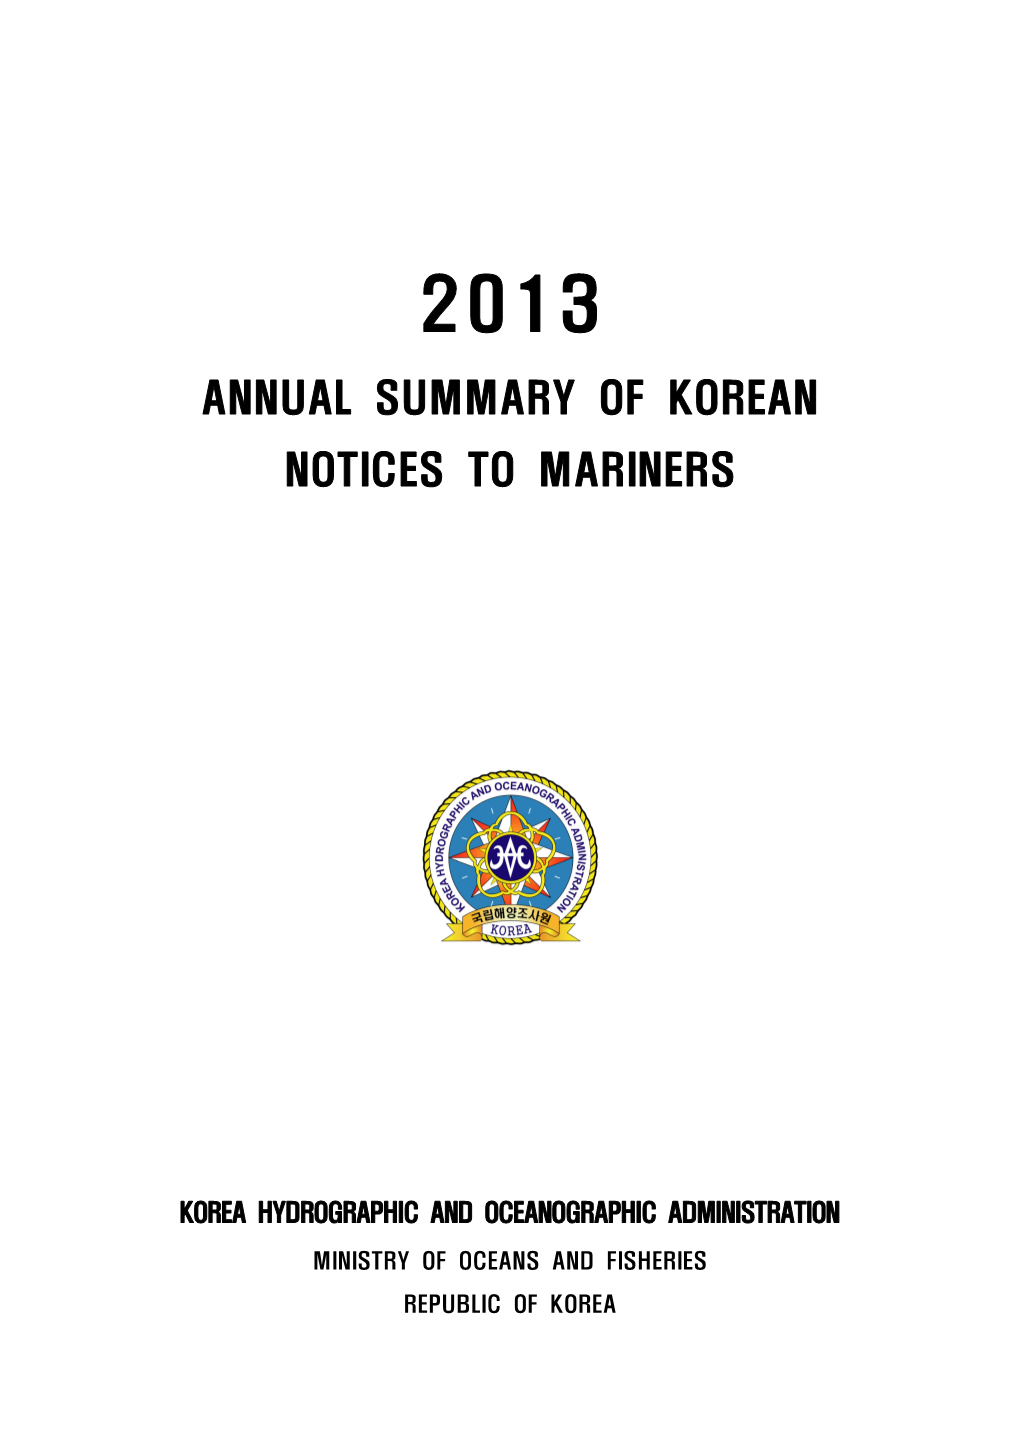 Annual Summary of Korean Notices to Mariners